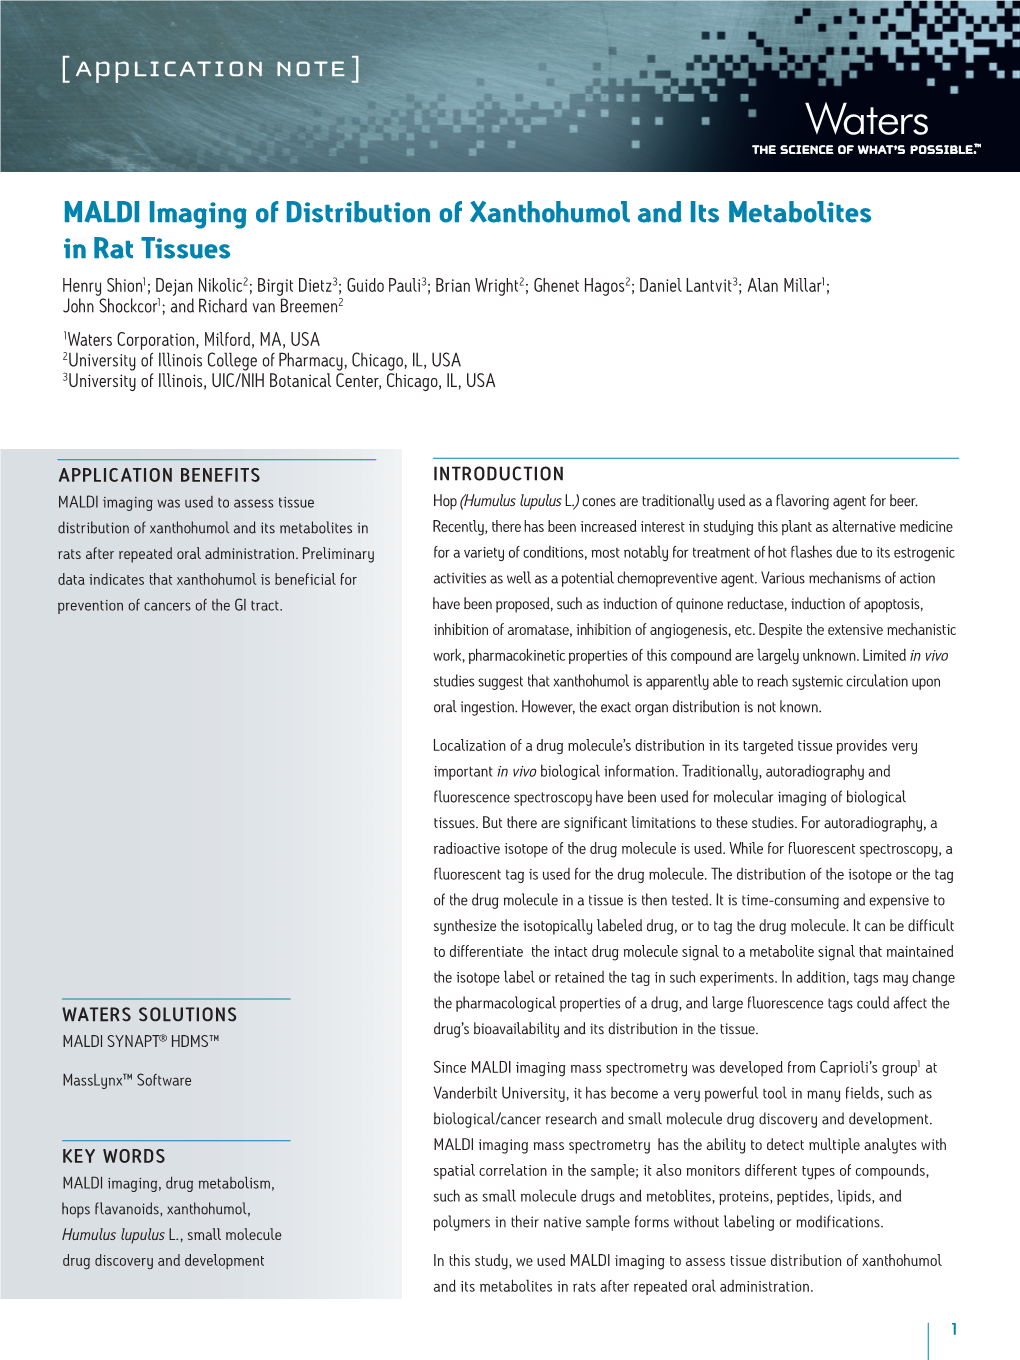 MALDI Imaging of Distribution of Xanthohumol and Its Metabolites in Rat Tissues